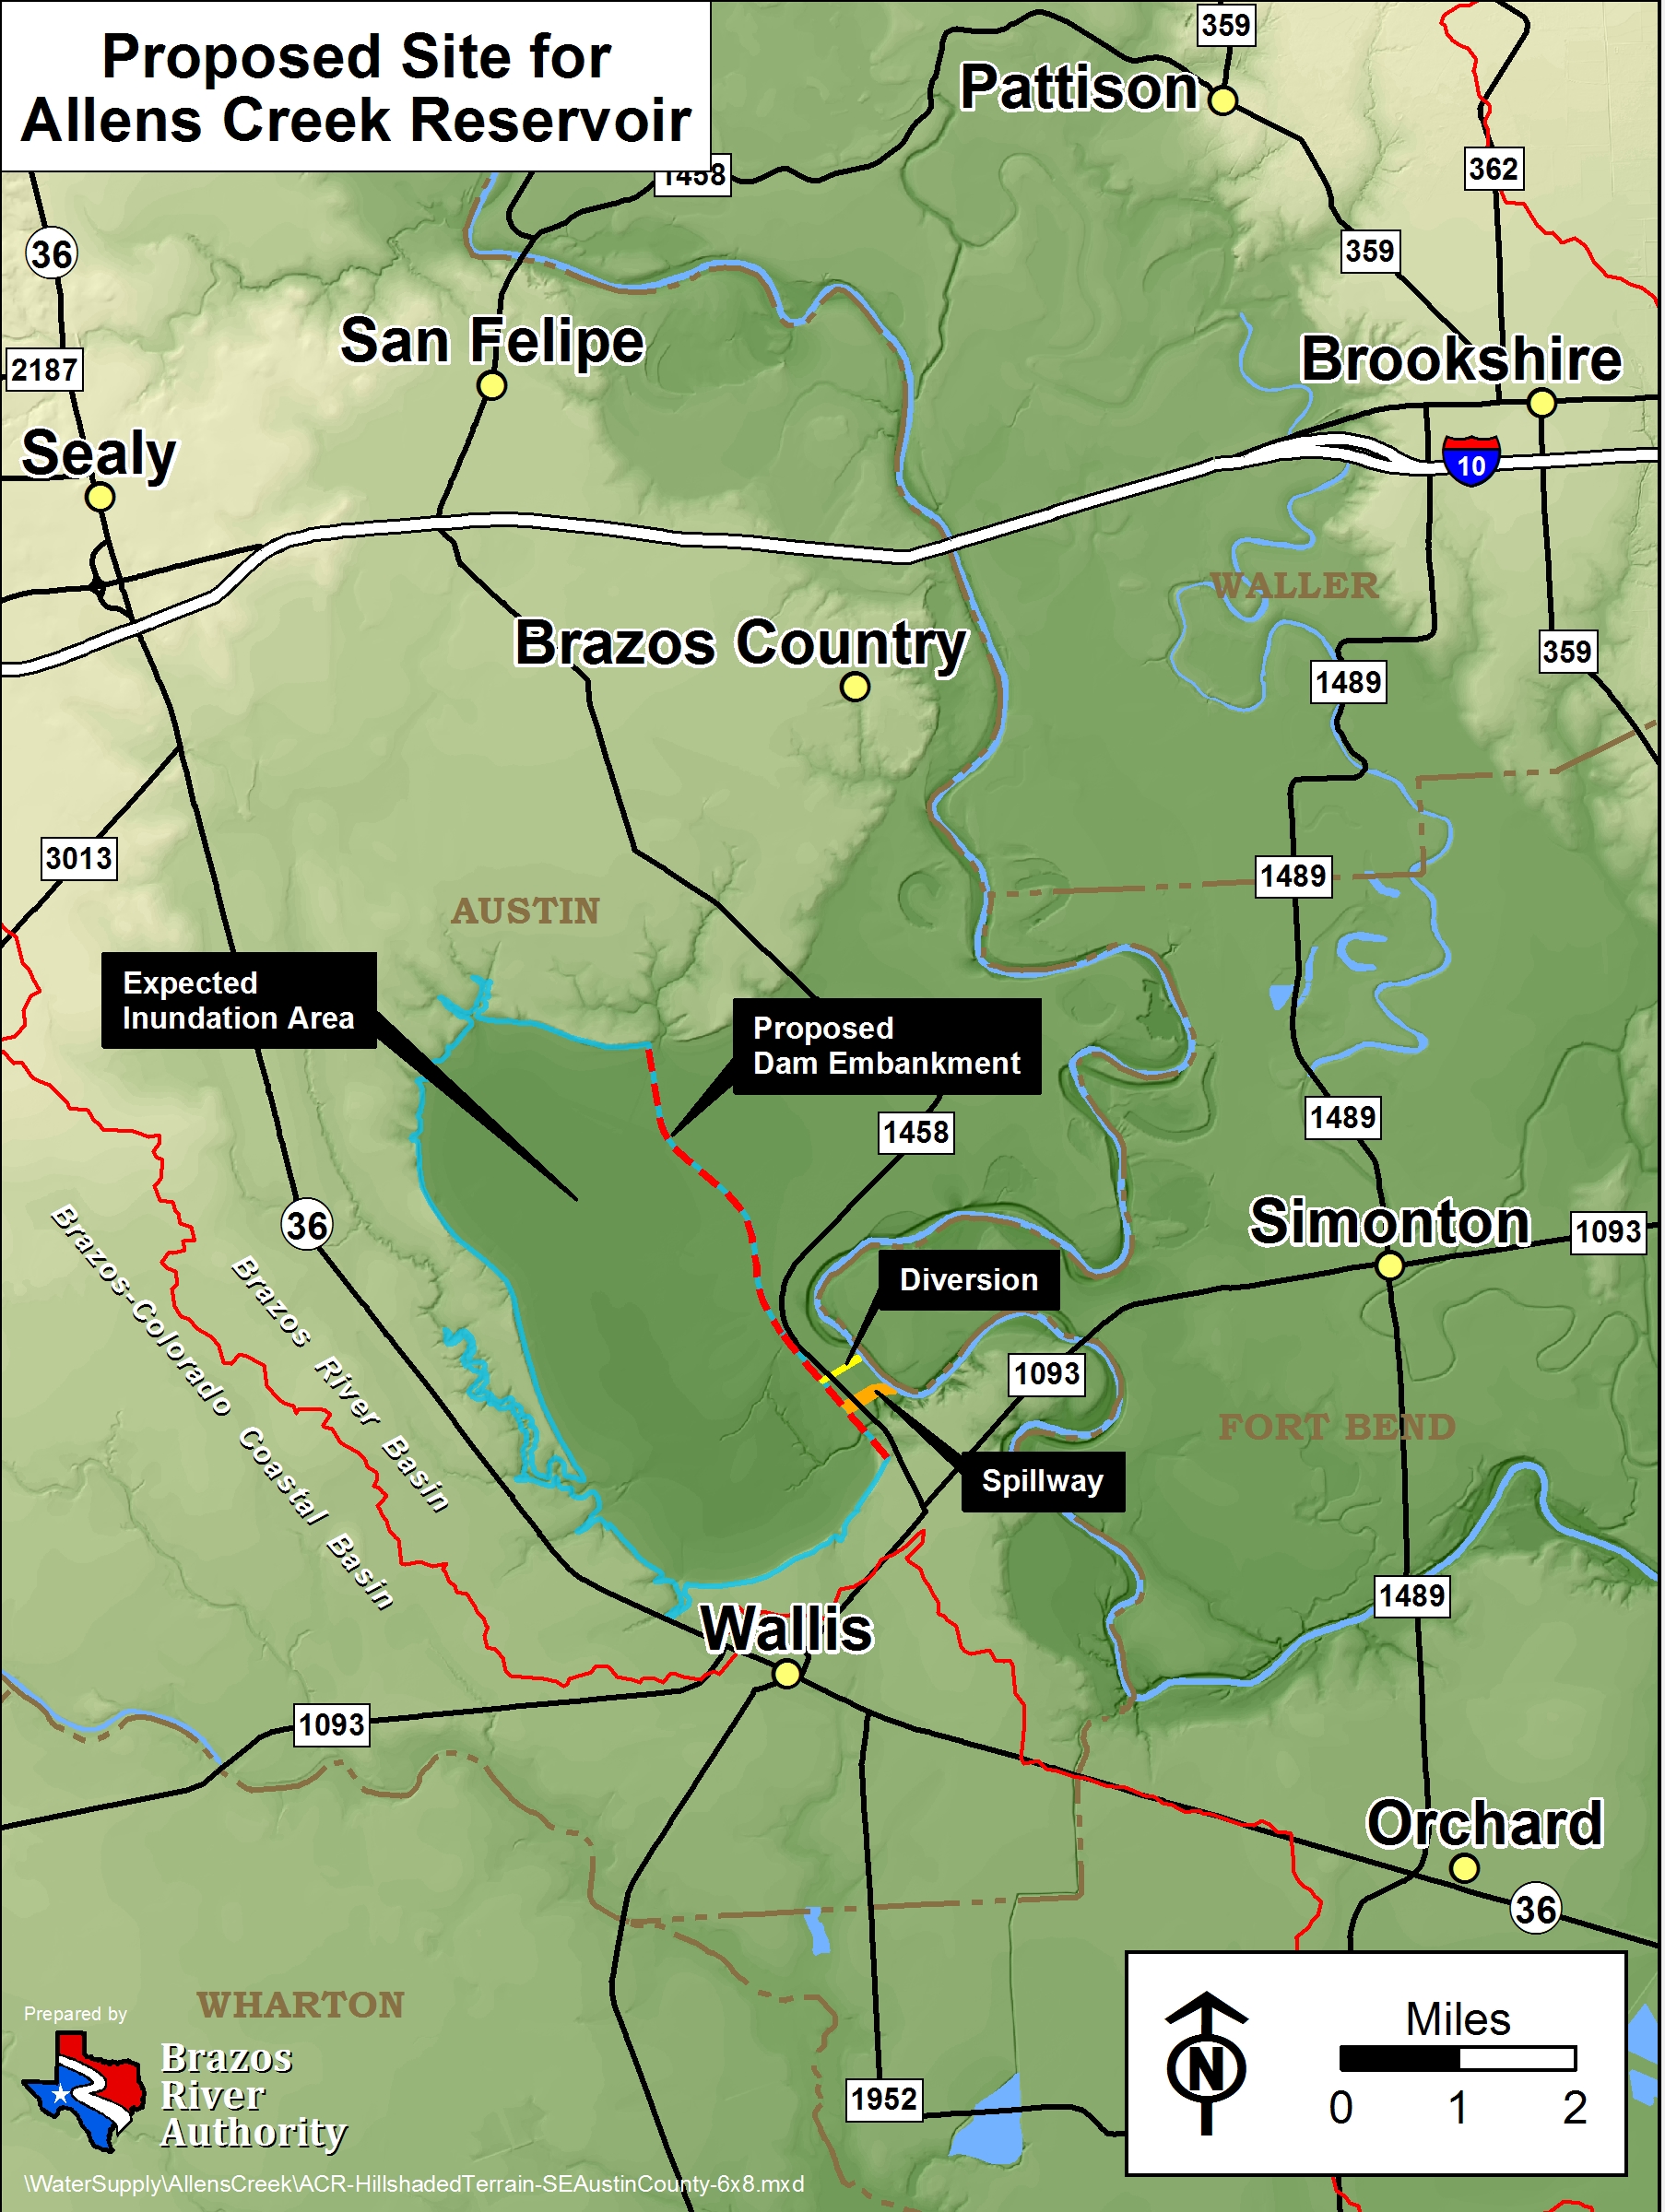 A map of the proposed Allens Creek Reservoir location